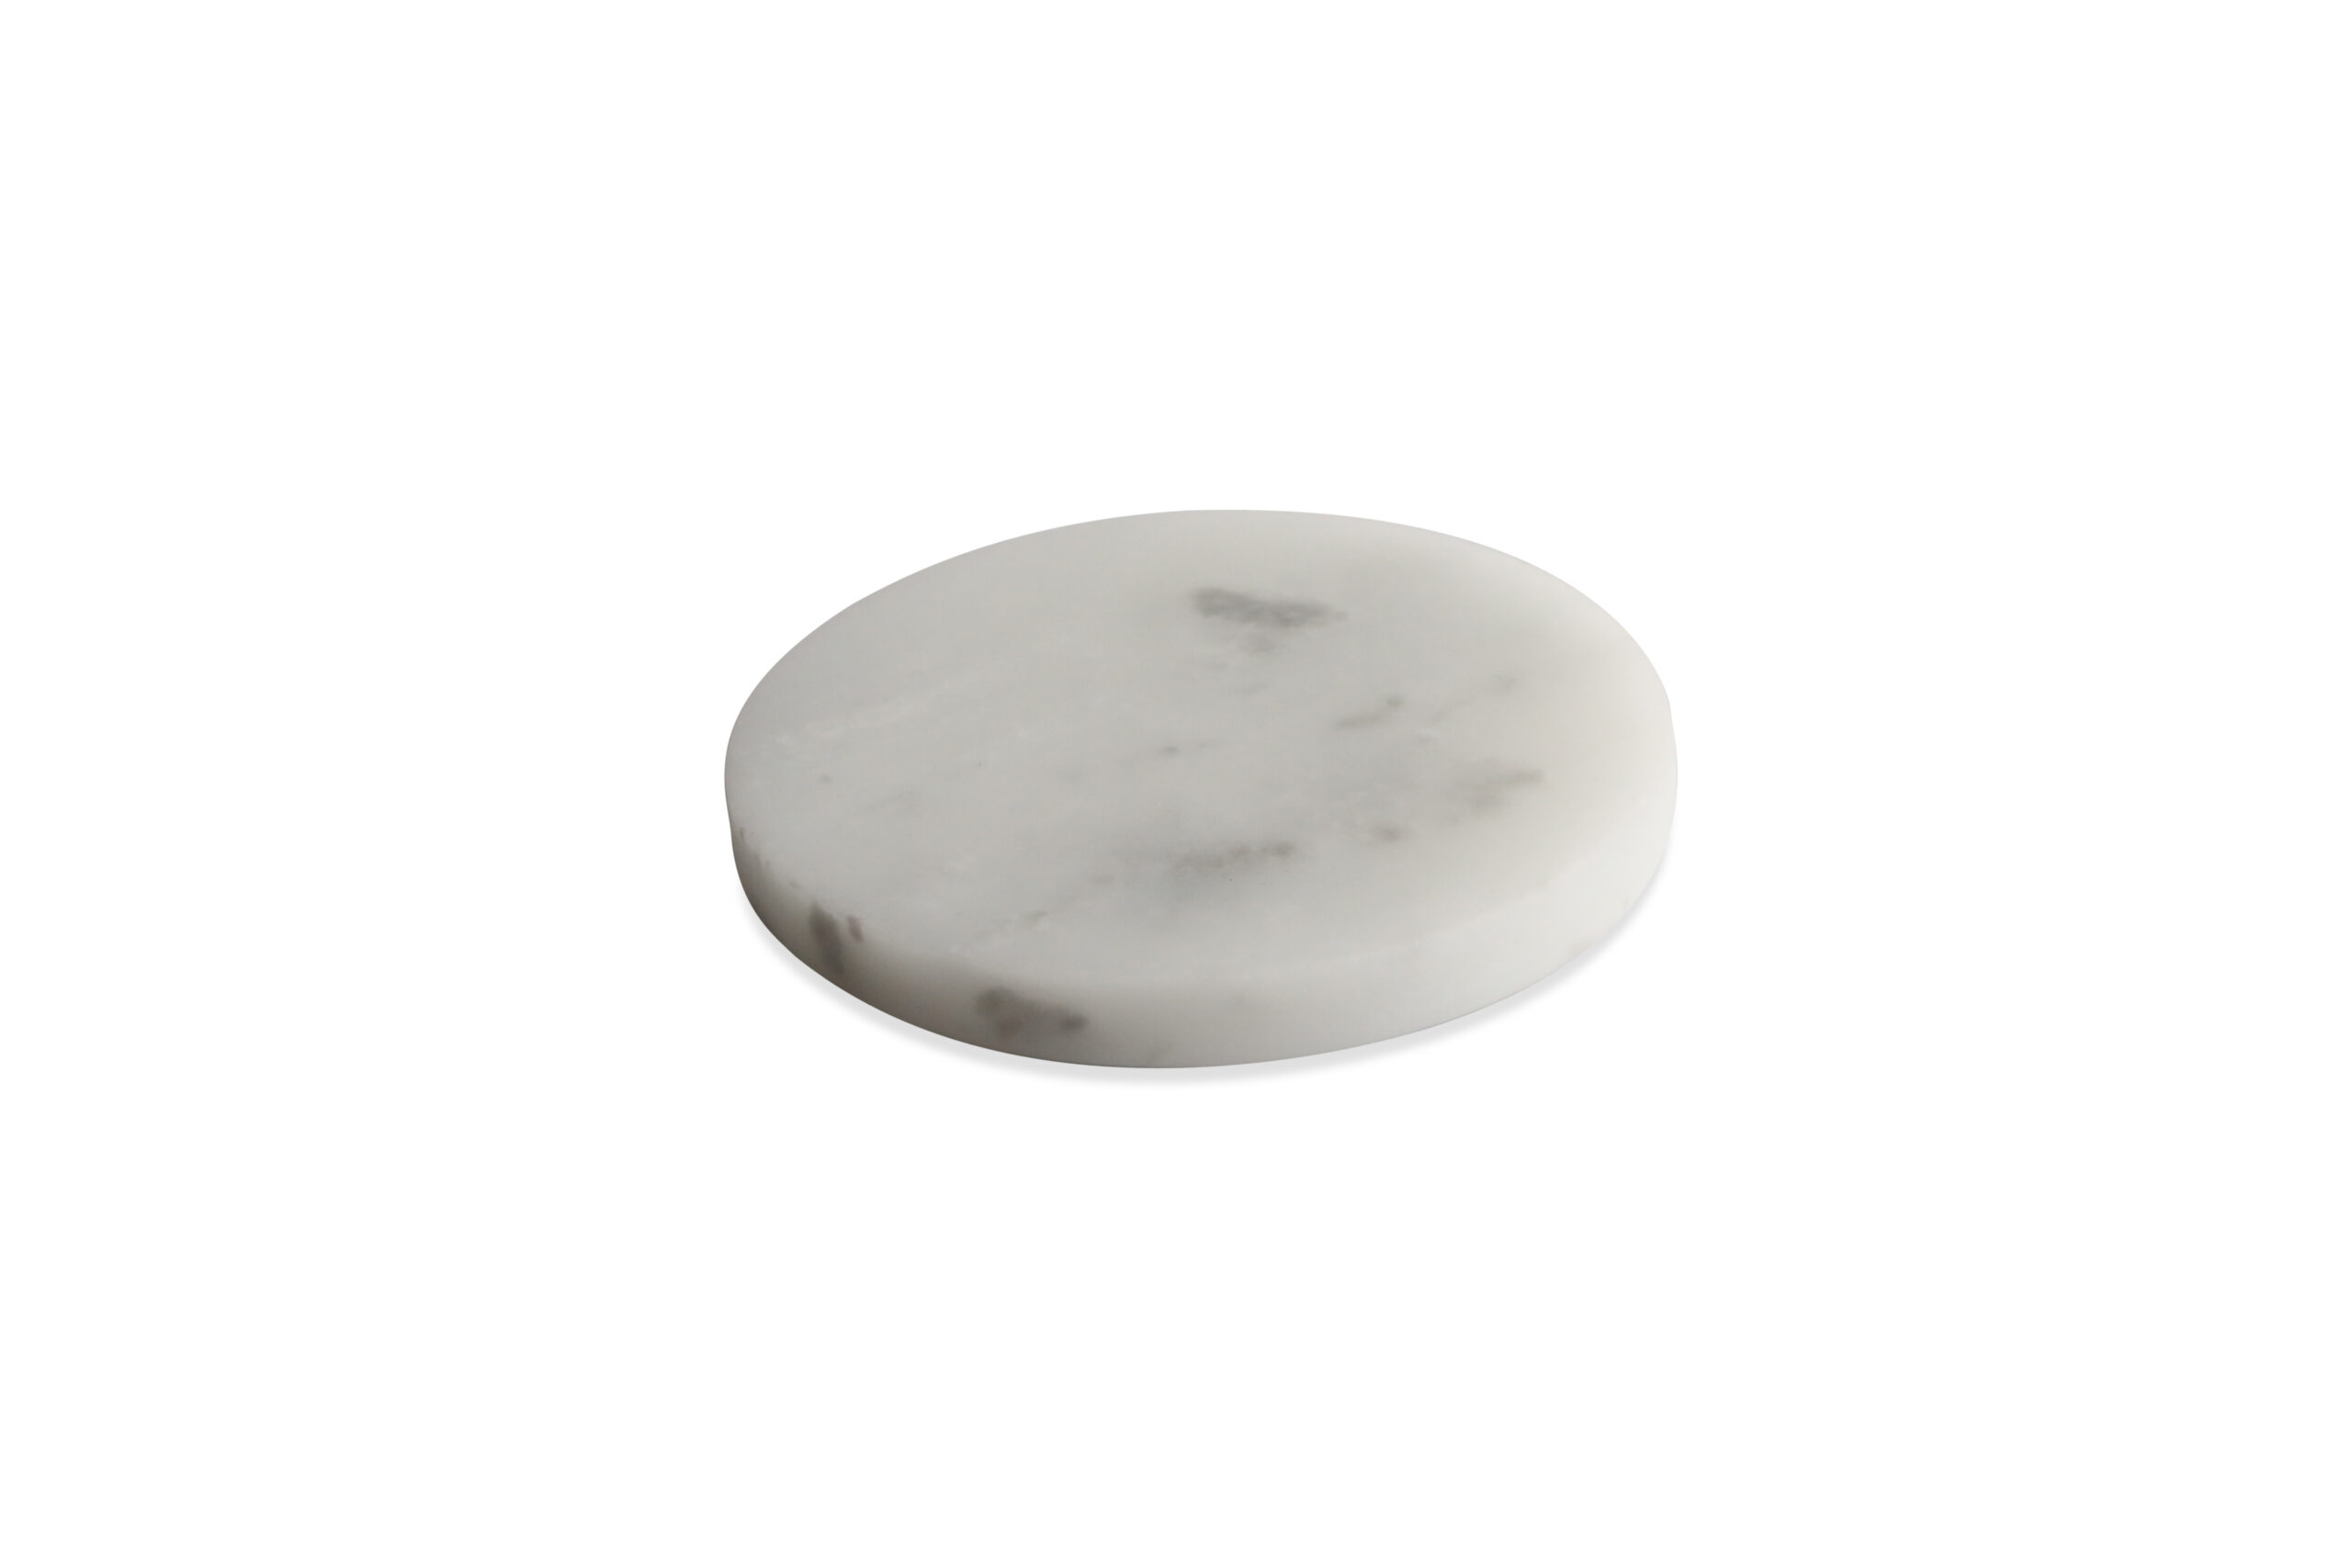 Marble candle plate is the perfect place to hold your Bride Calm candle and to protect your surfaces from any spills or stains.